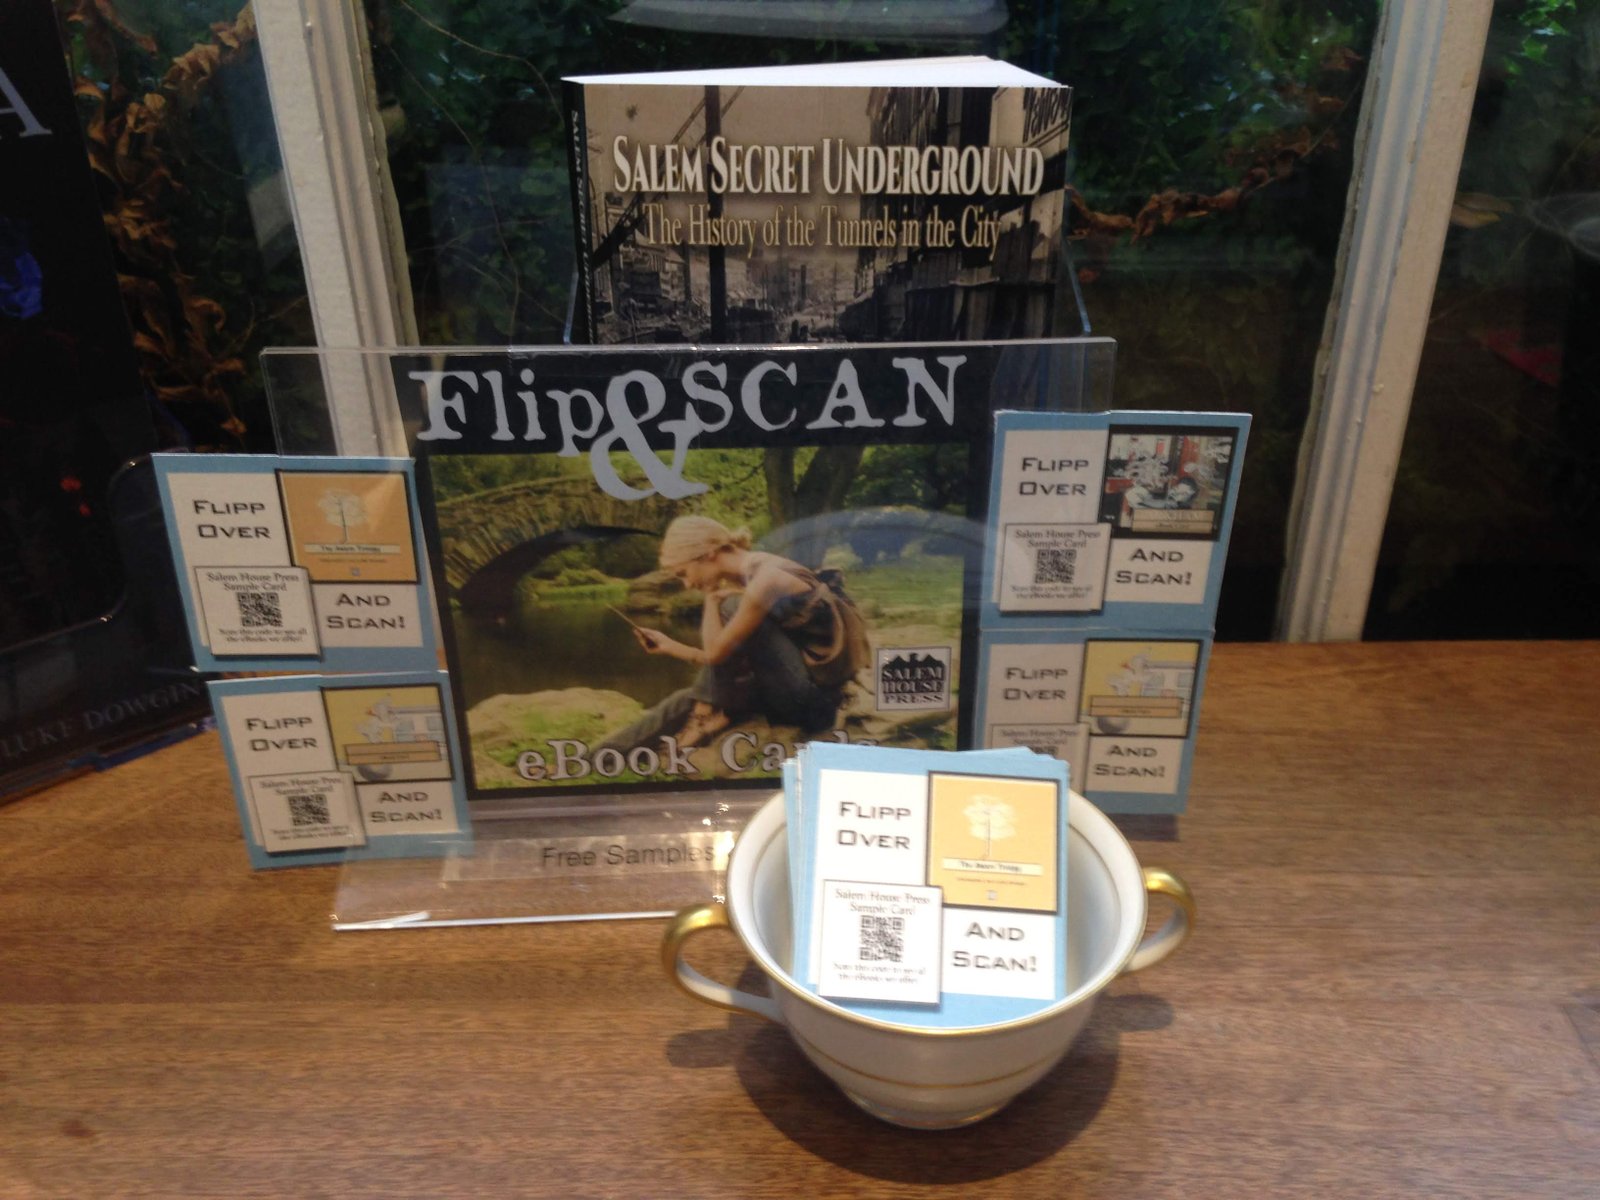 Flip and Scan eBBook Sample cards in your store